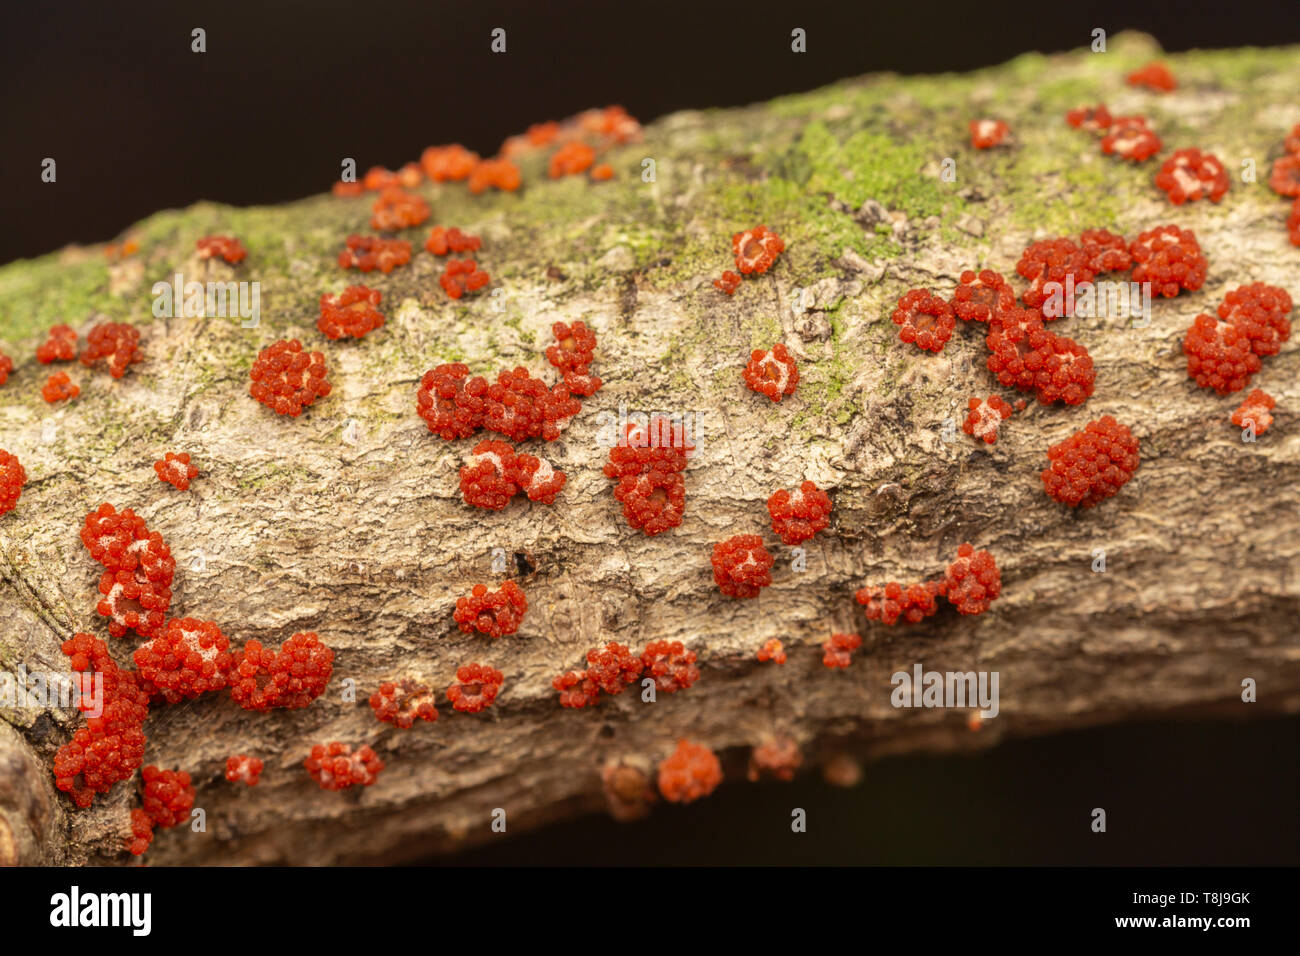 A plant pathogen (Neonectria sp.), growing on a tree branch. Stock Photo